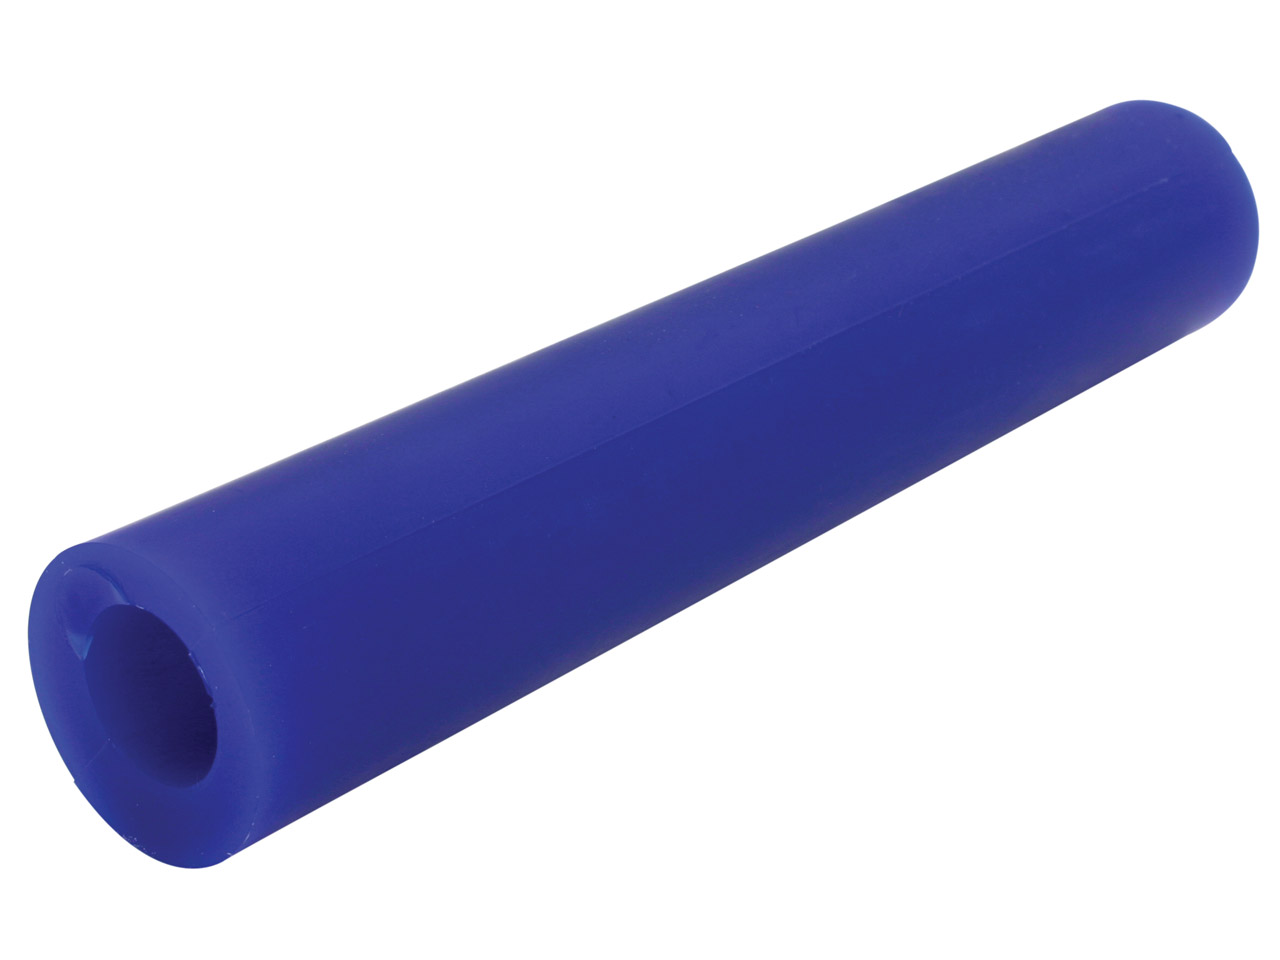 Do you have a safety data sheet for Ferris Round Wax Tube With Off Centre Hole, Blue, 152mm/6" Long, 27mm Diameter?